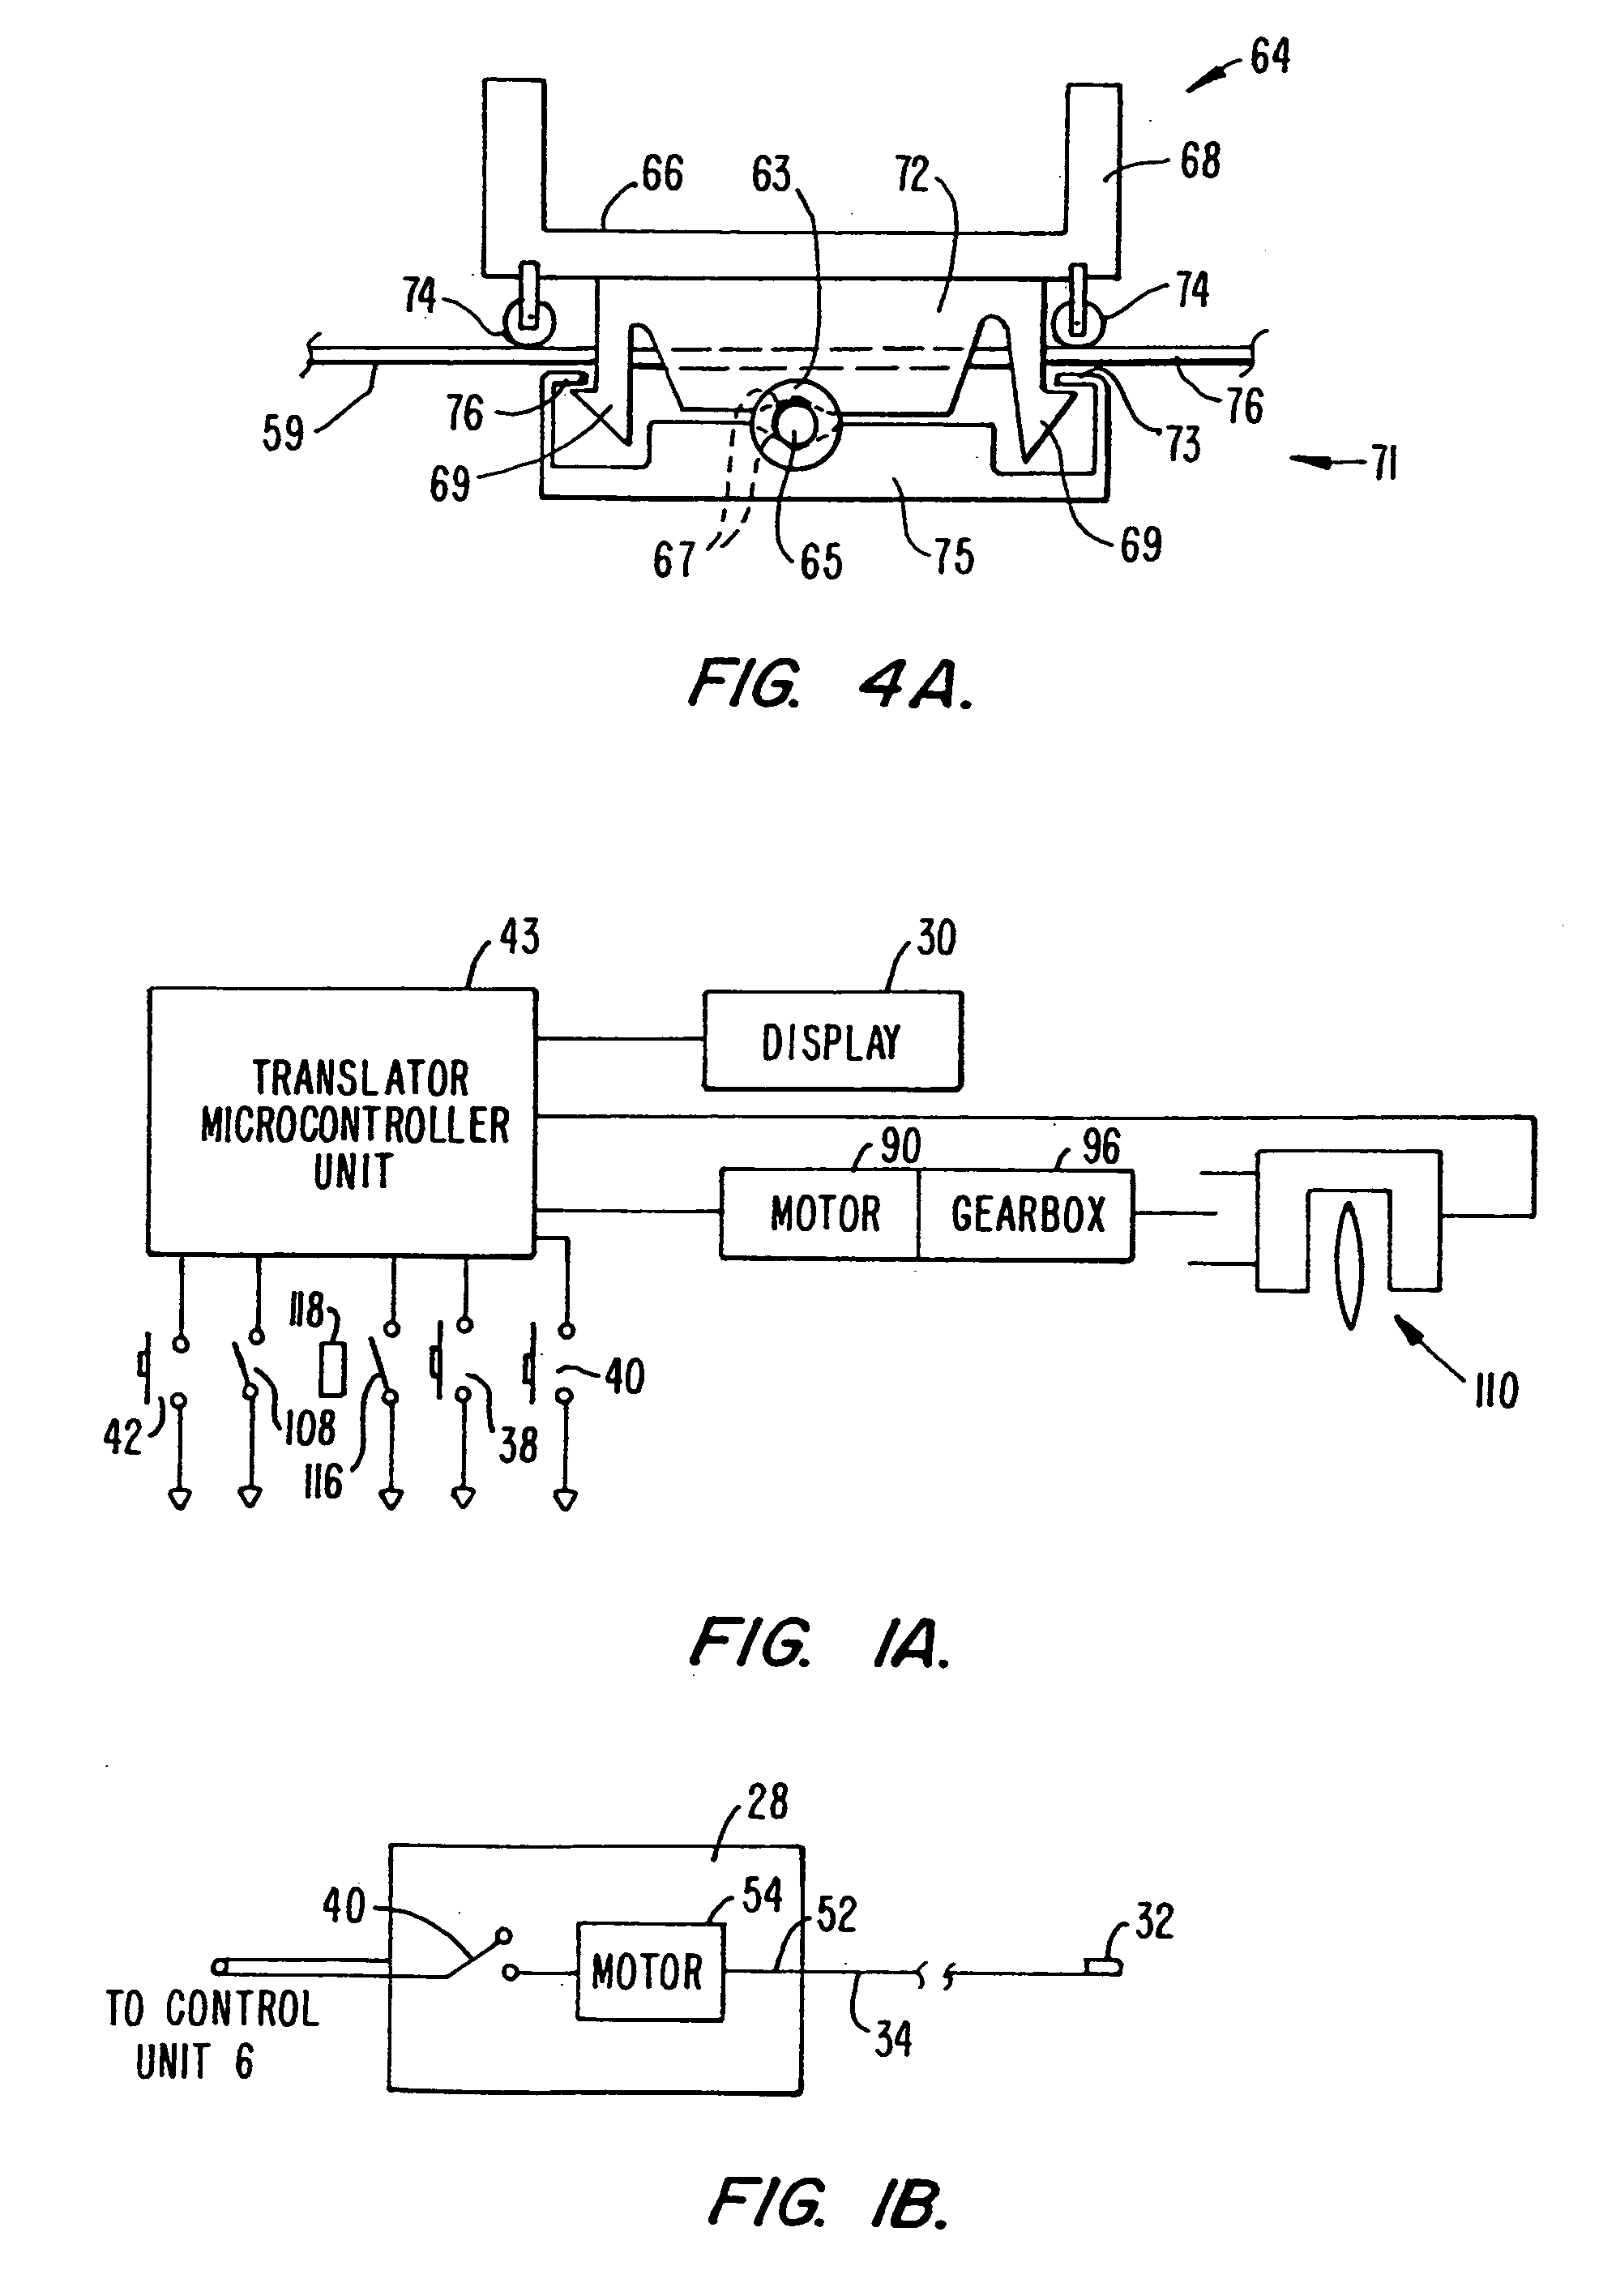 Driveable catheter systems and methods